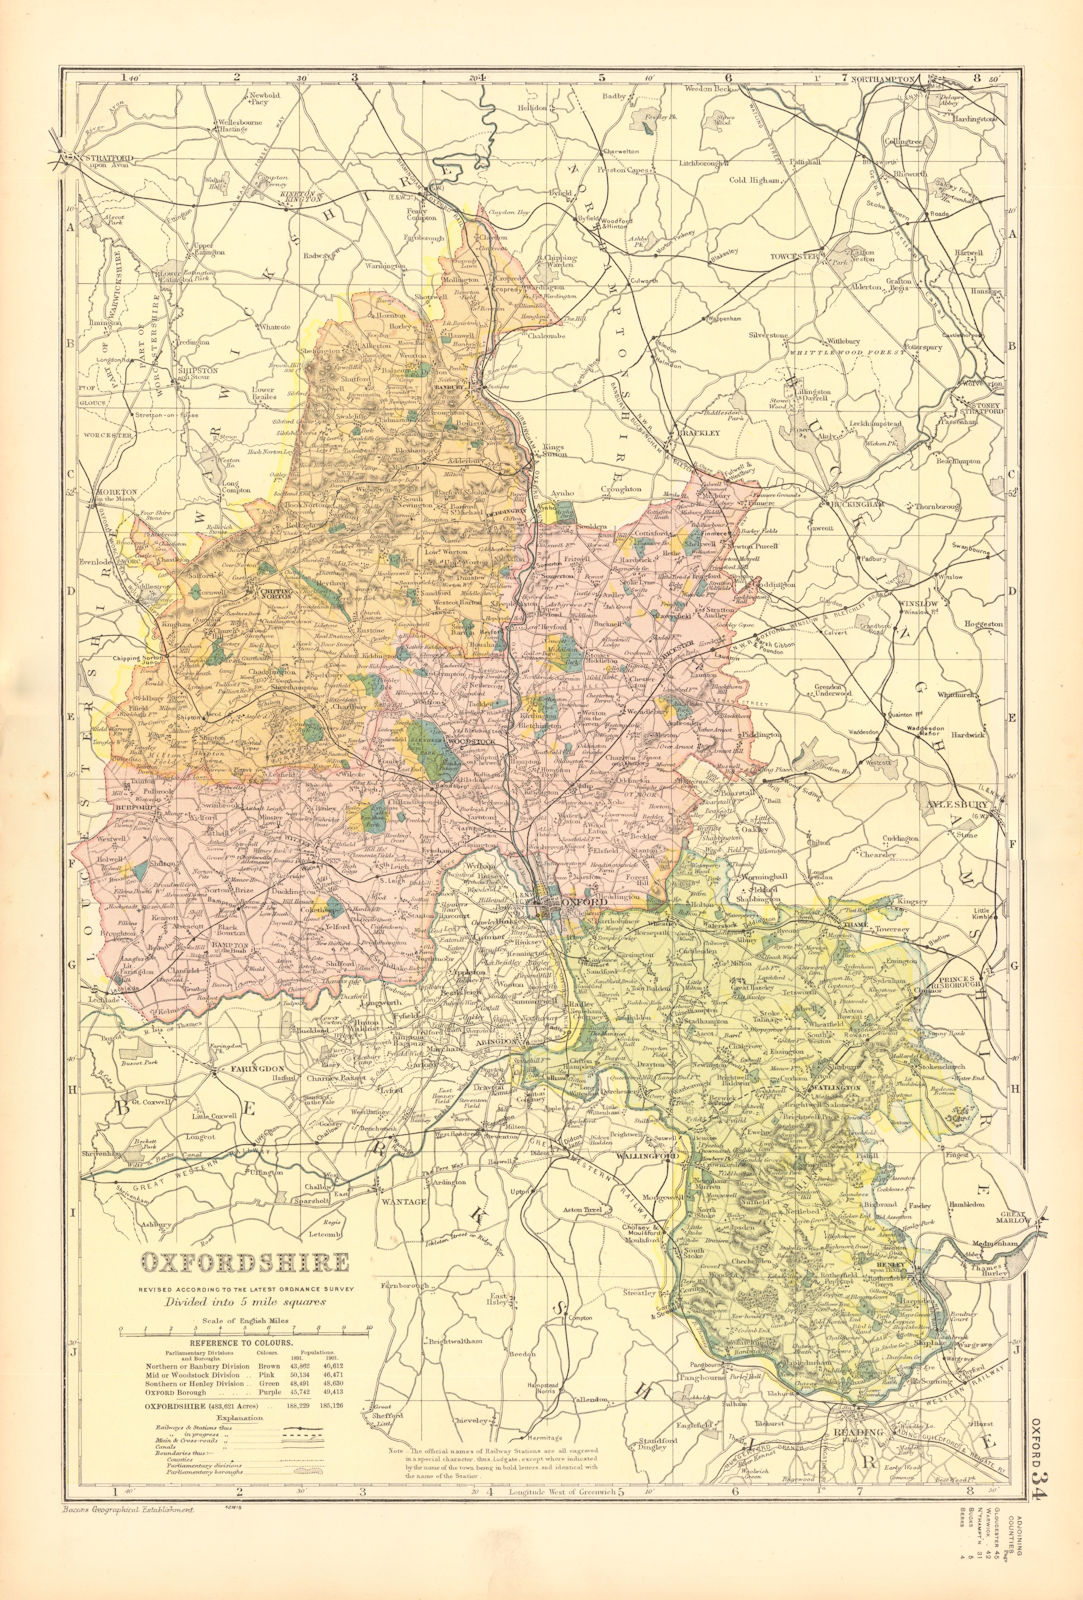 OXFORDSHIRE. Showing Parliamentary divisions, boroughs & parks. BACON 1904 map